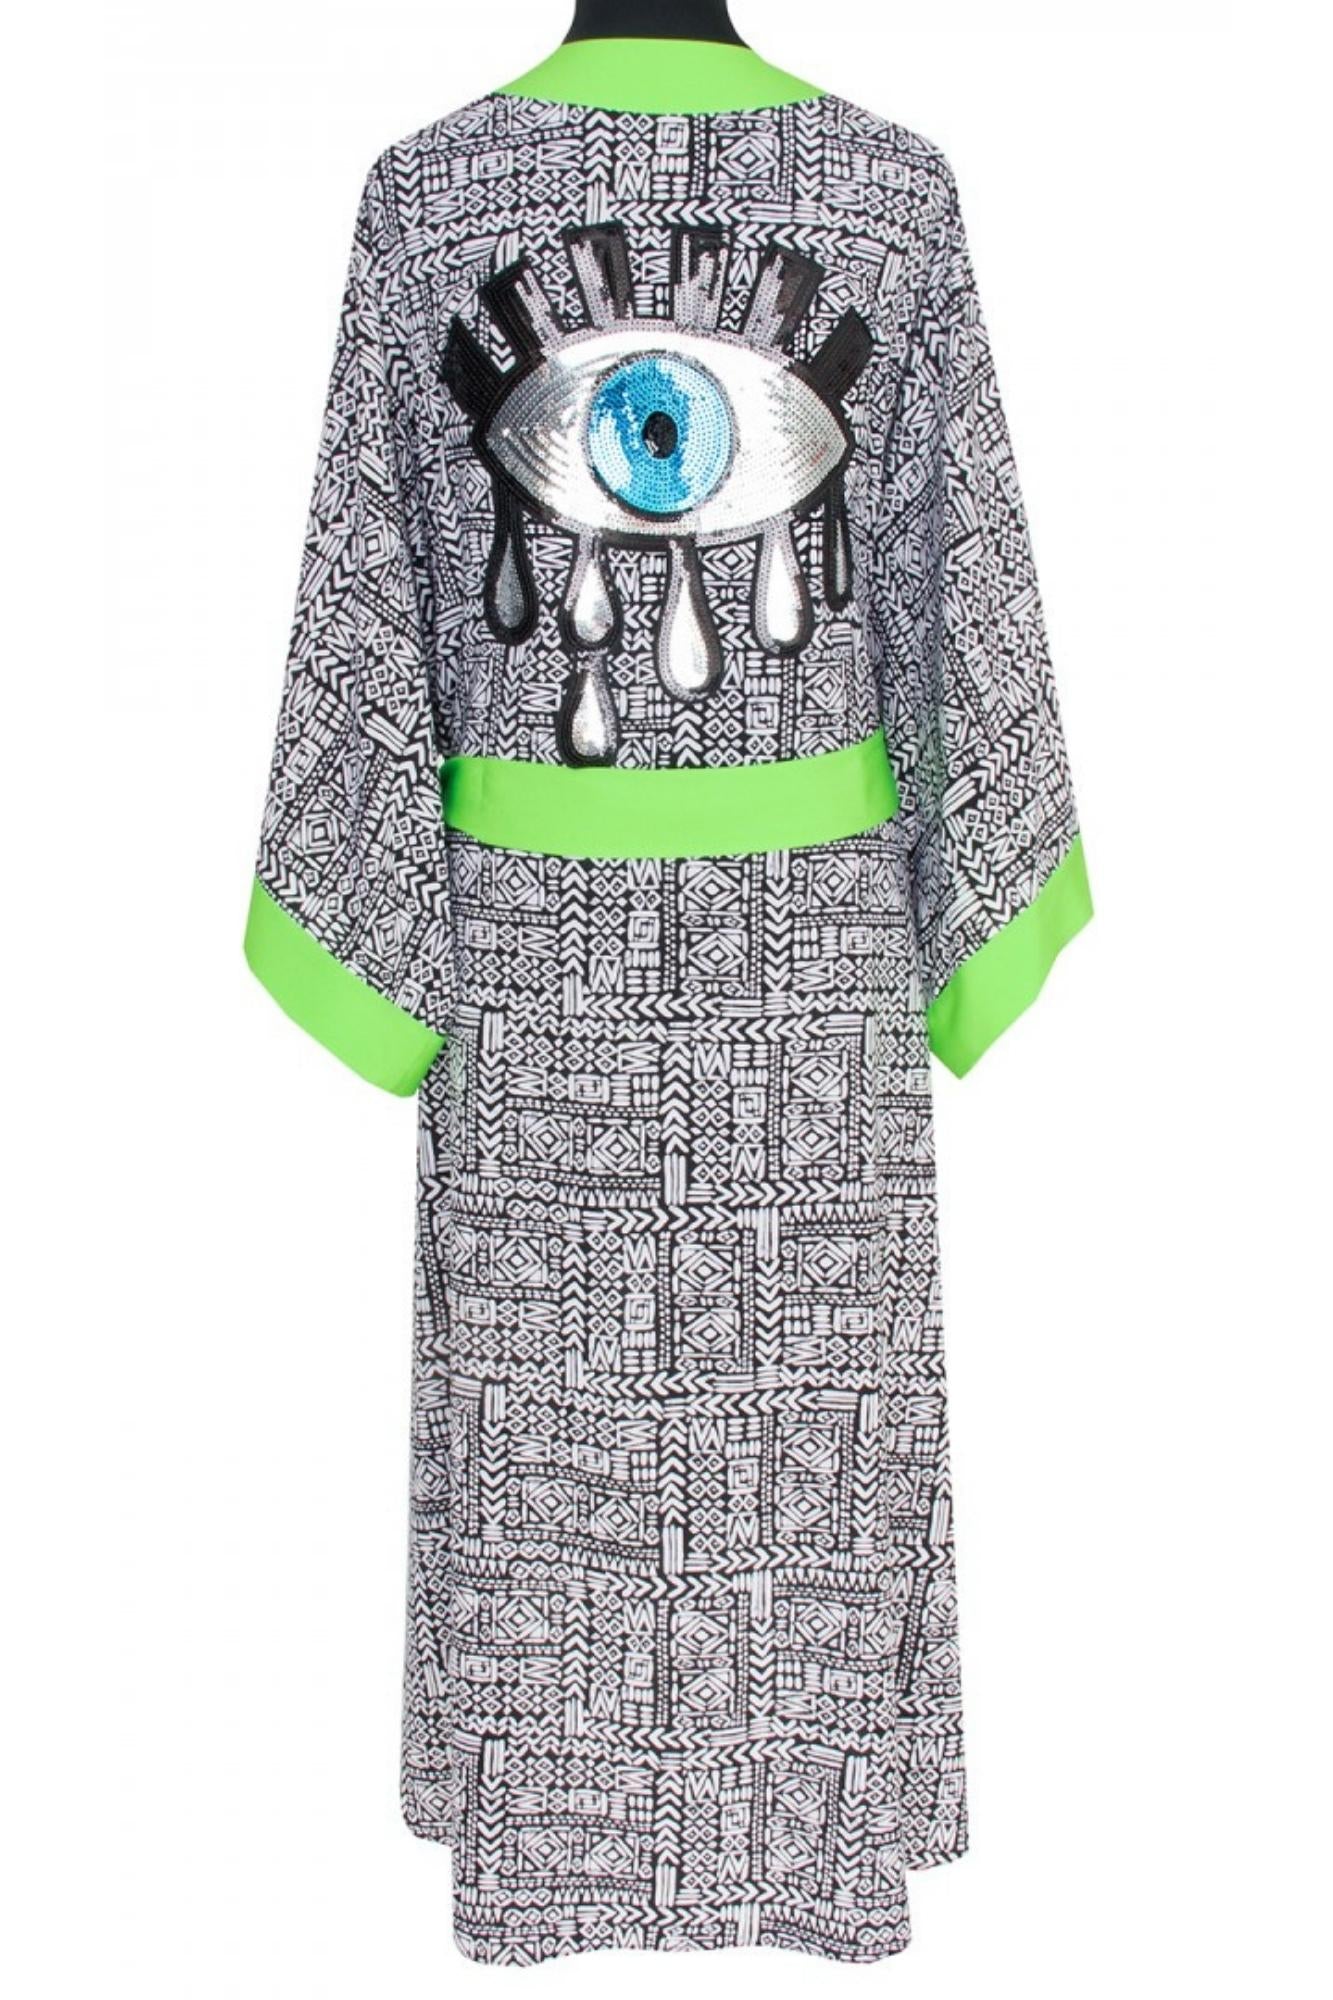 Kimono - Tribal print, with neon green finish.  - Neon green belt and trim  - Neon green tassels on the sides (except for Short Angel-Cut Kimono)  - Sequins evil eye patch on the back